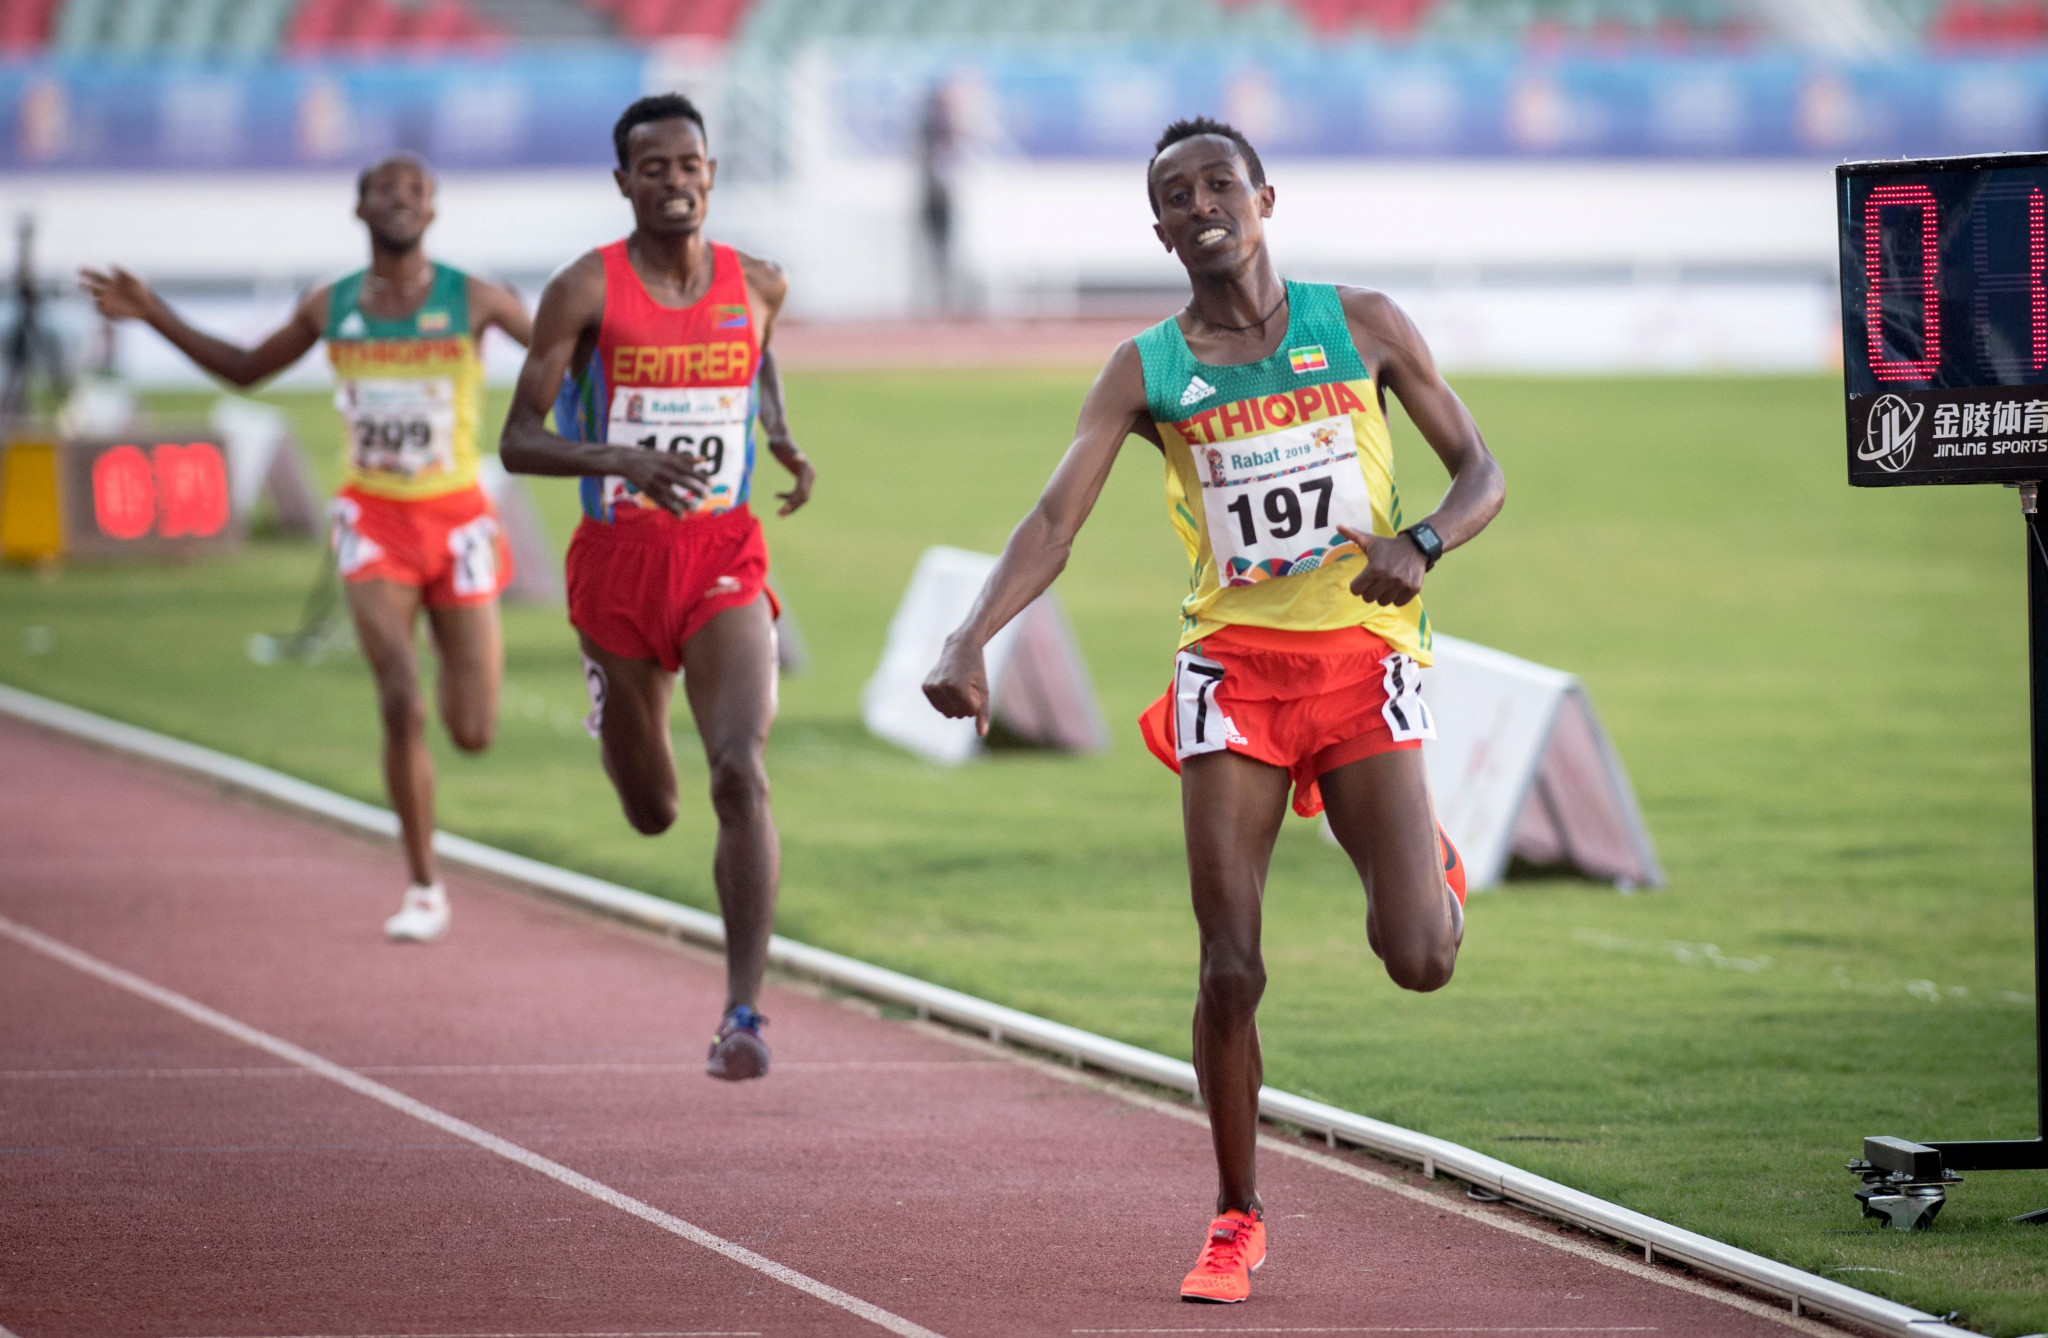 Berehanu Tsegu triumphed in the 10,000 metre competition at the 2019 African Games in Morocco ©Getty Images